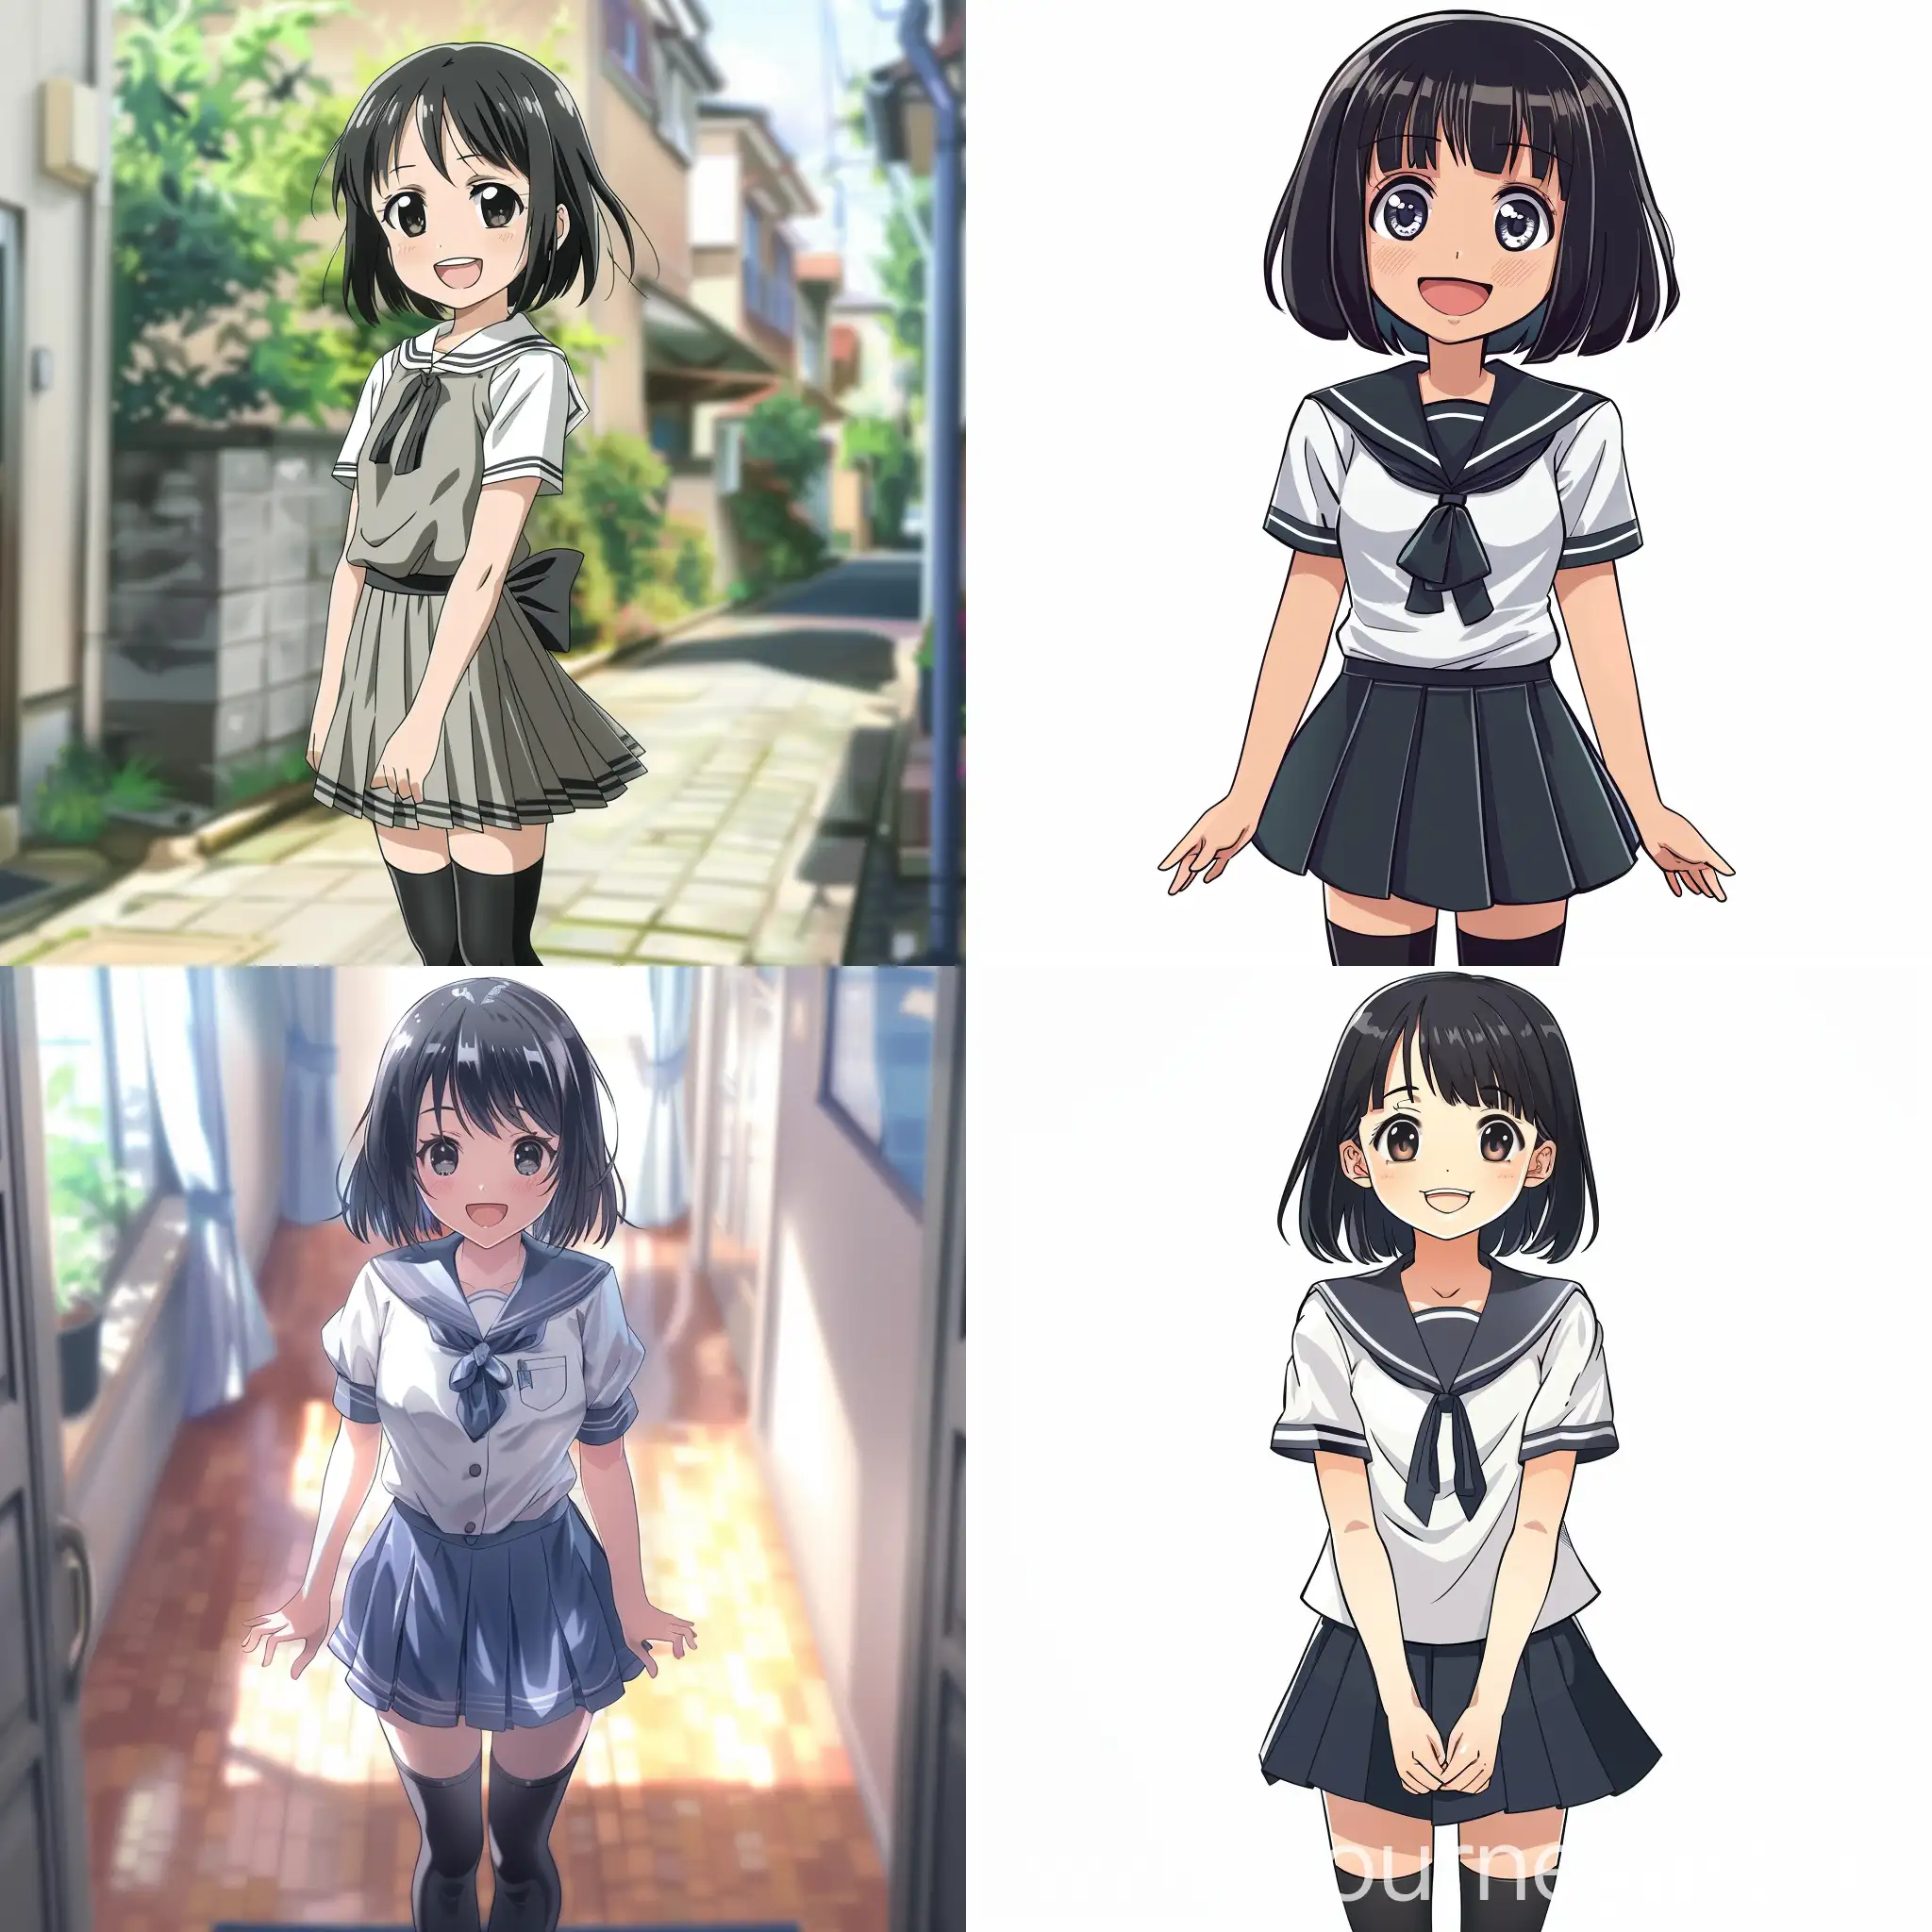 Adorable-Japanese-Schoolgirl-in-Anime-Style-Smiling-Brightly